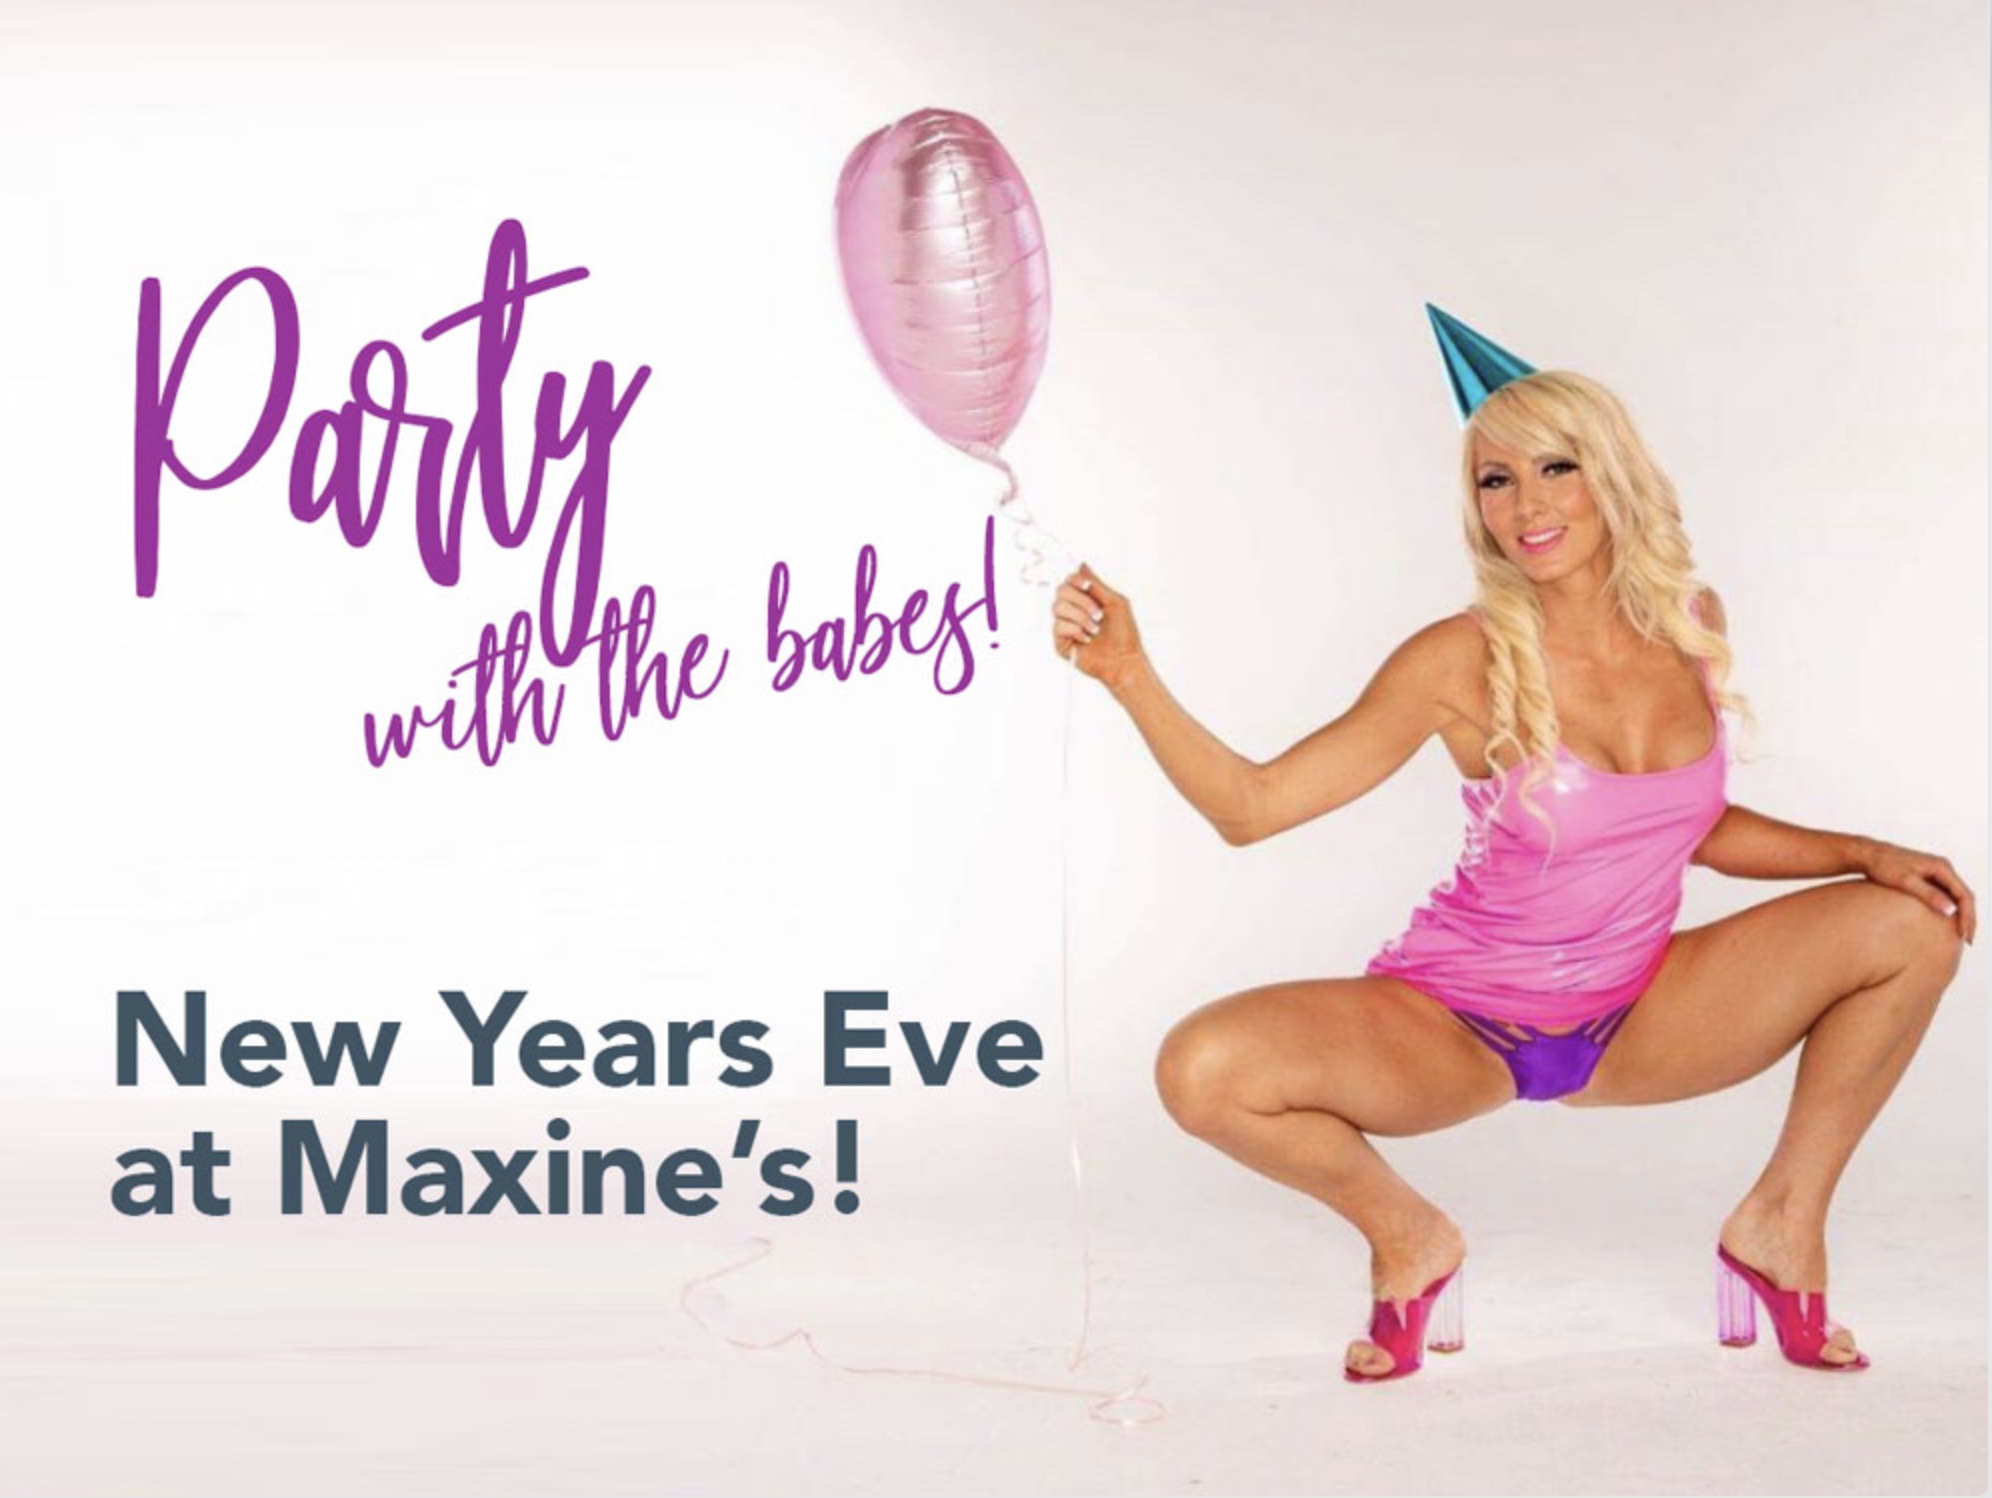 Party with the babes! New Years Eve at Maxine's!